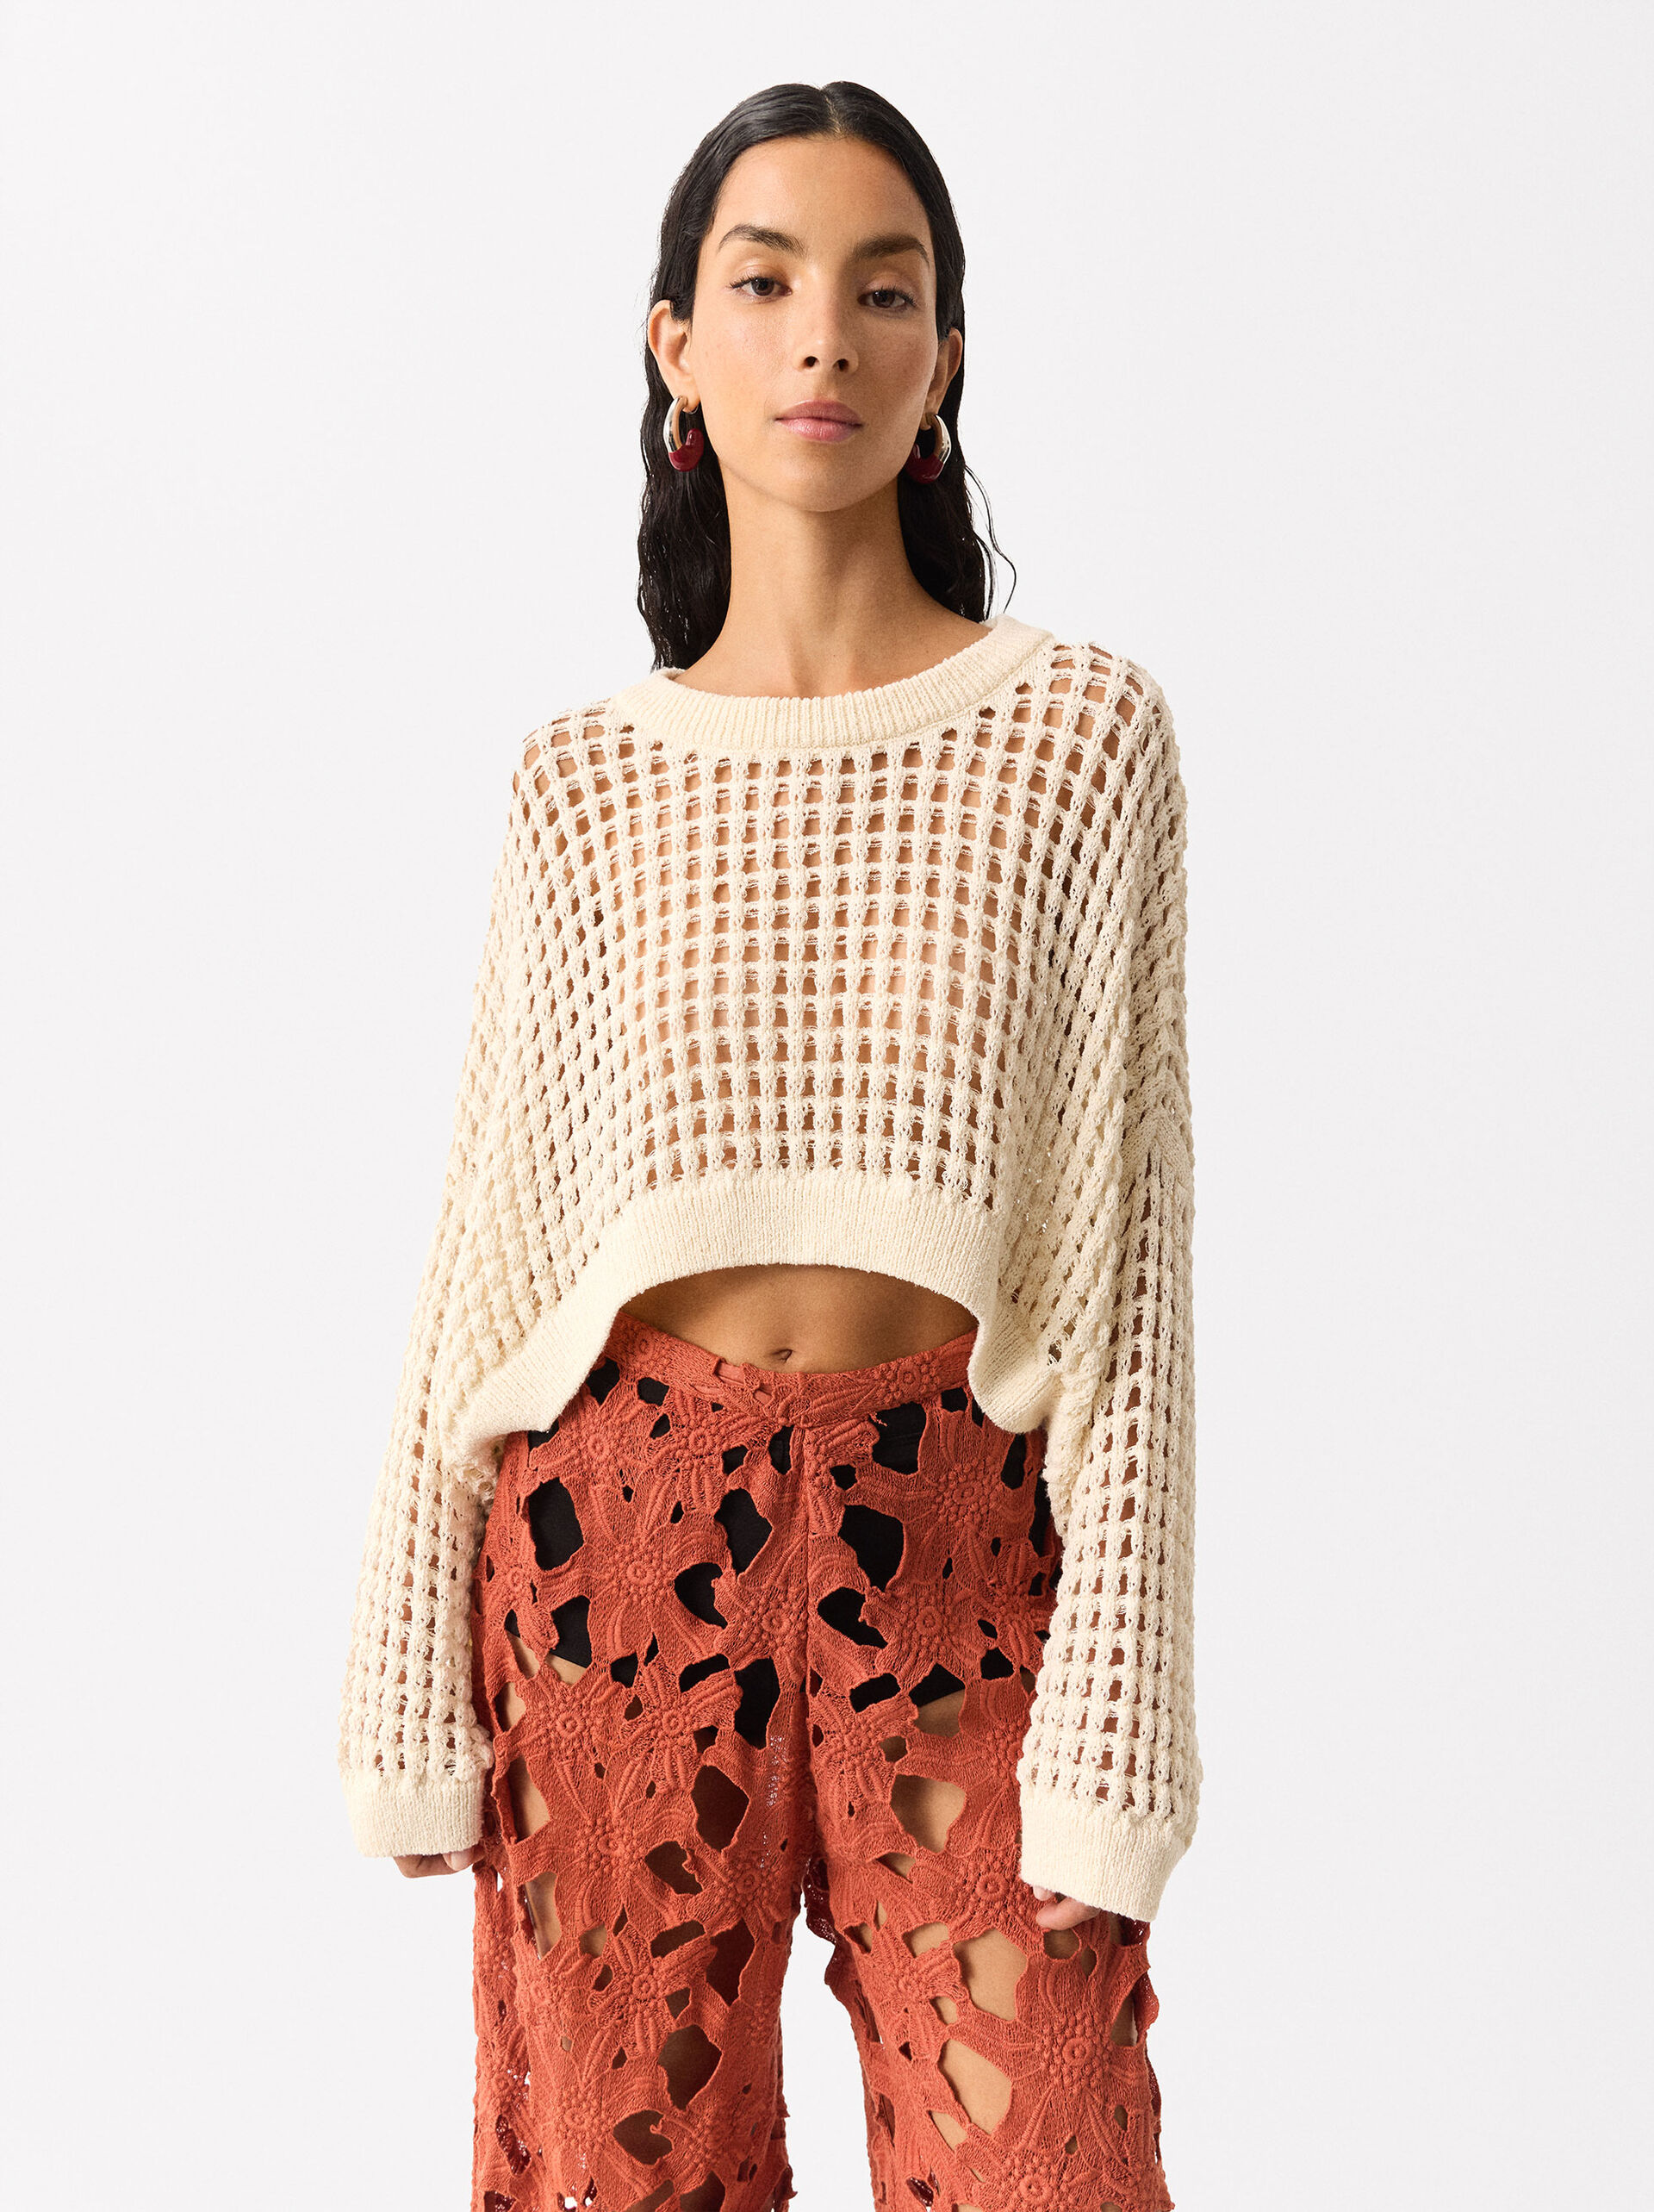 Online Exclusive - Round-Neck Knit Sweater image number 2.0